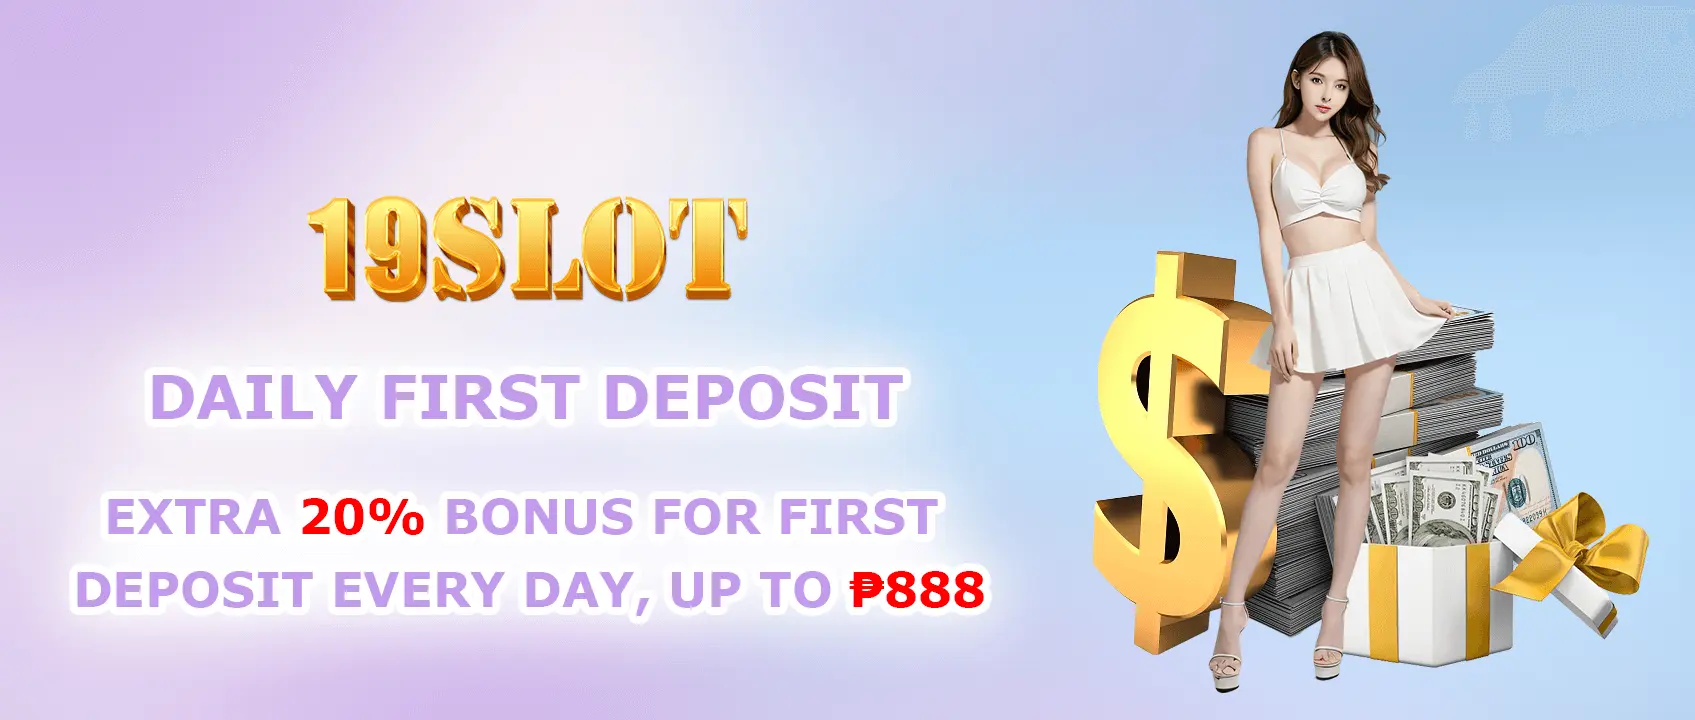 19SLOT VIP- FIRST DAILY DEPOSIT